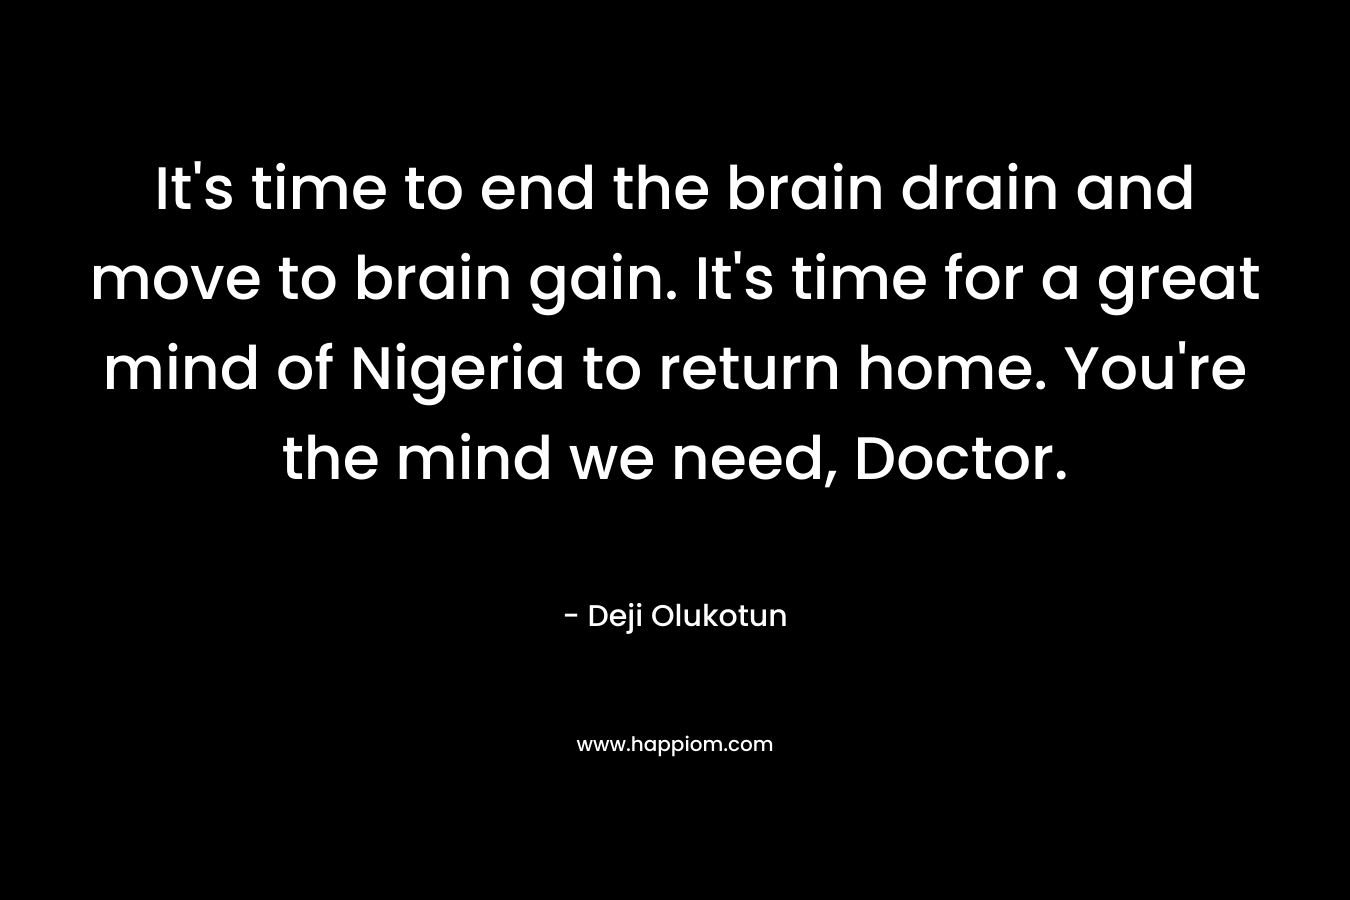 It’s time to end the brain drain and move to brain gain. It’s time for a great mind of Nigeria to return home. You’re the mind we need, Doctor. – Deji Olukotun